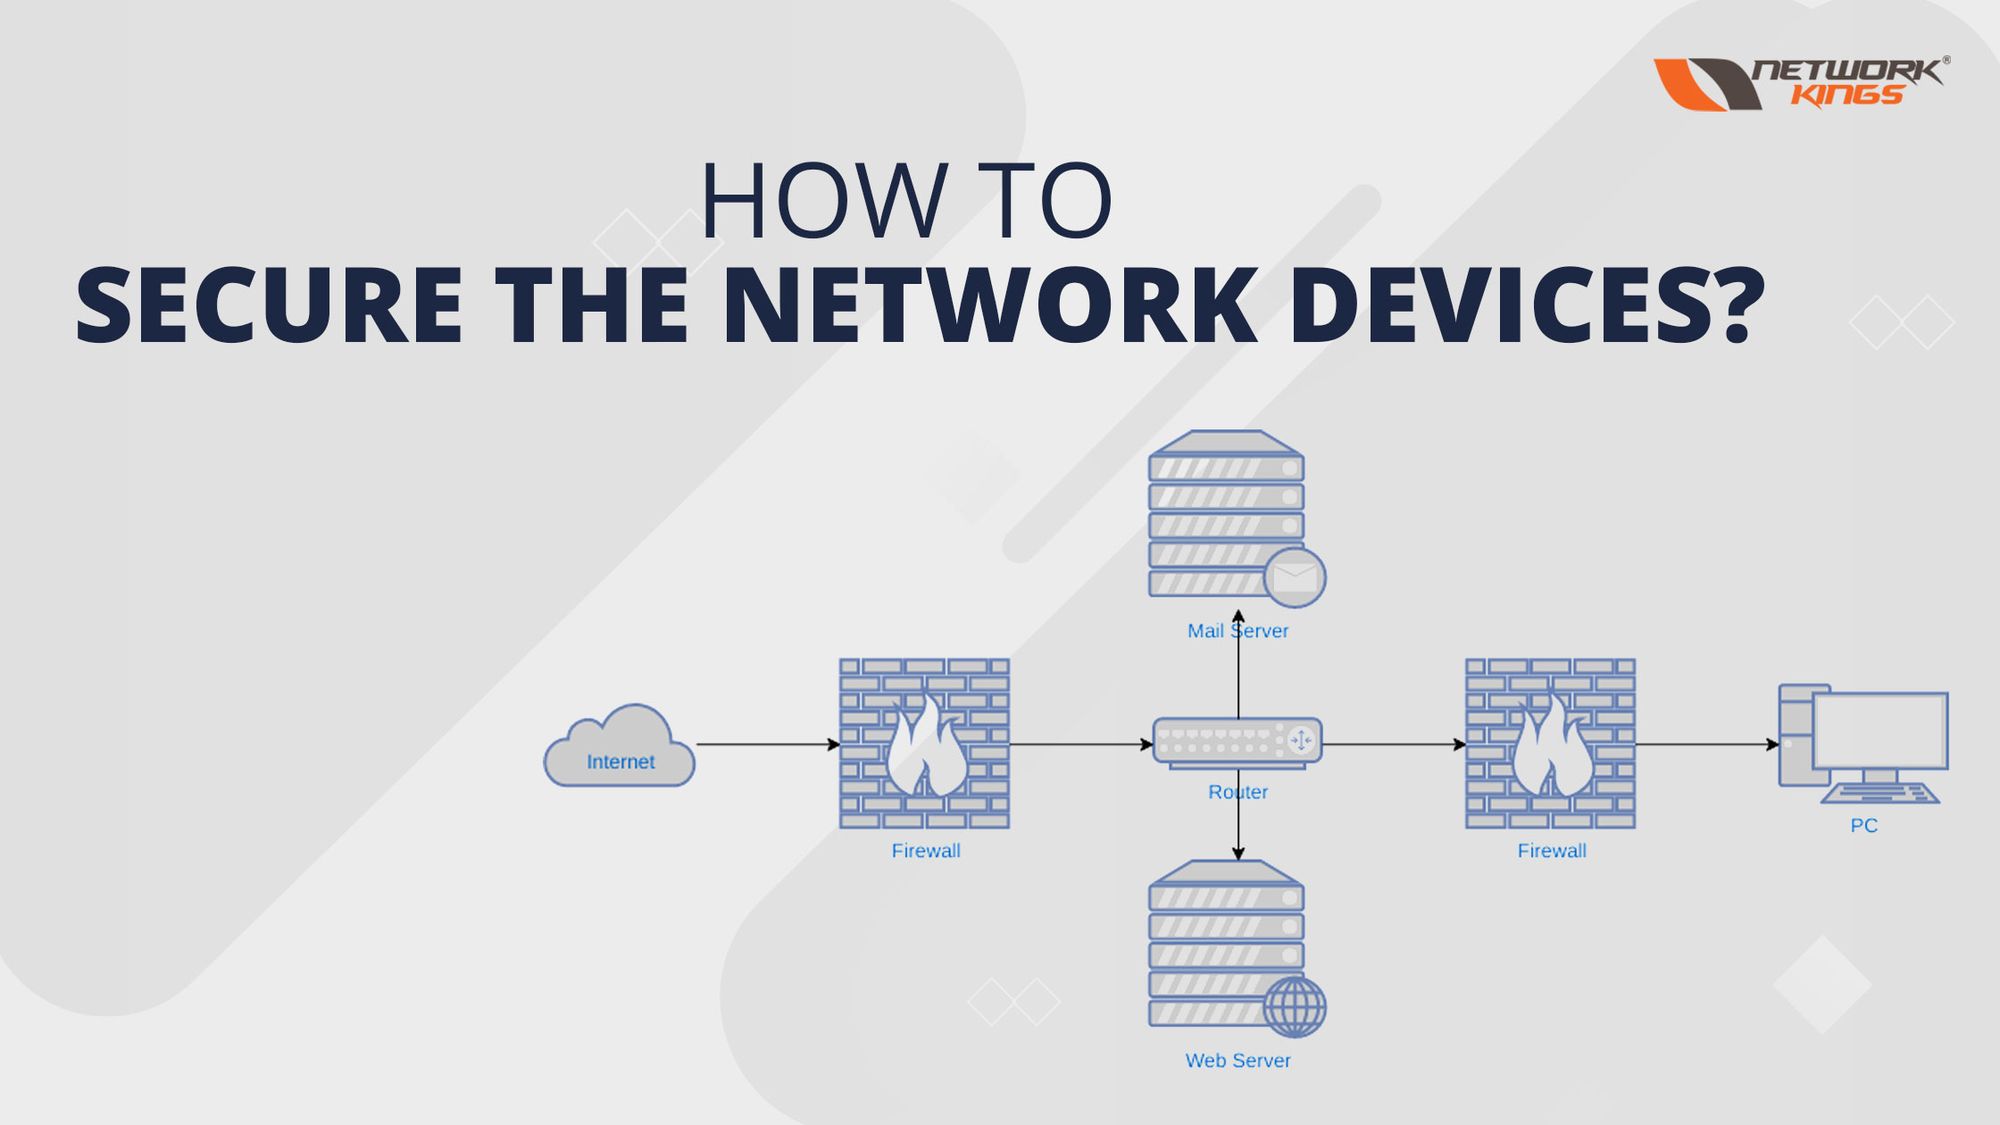 How to secure the network devices?